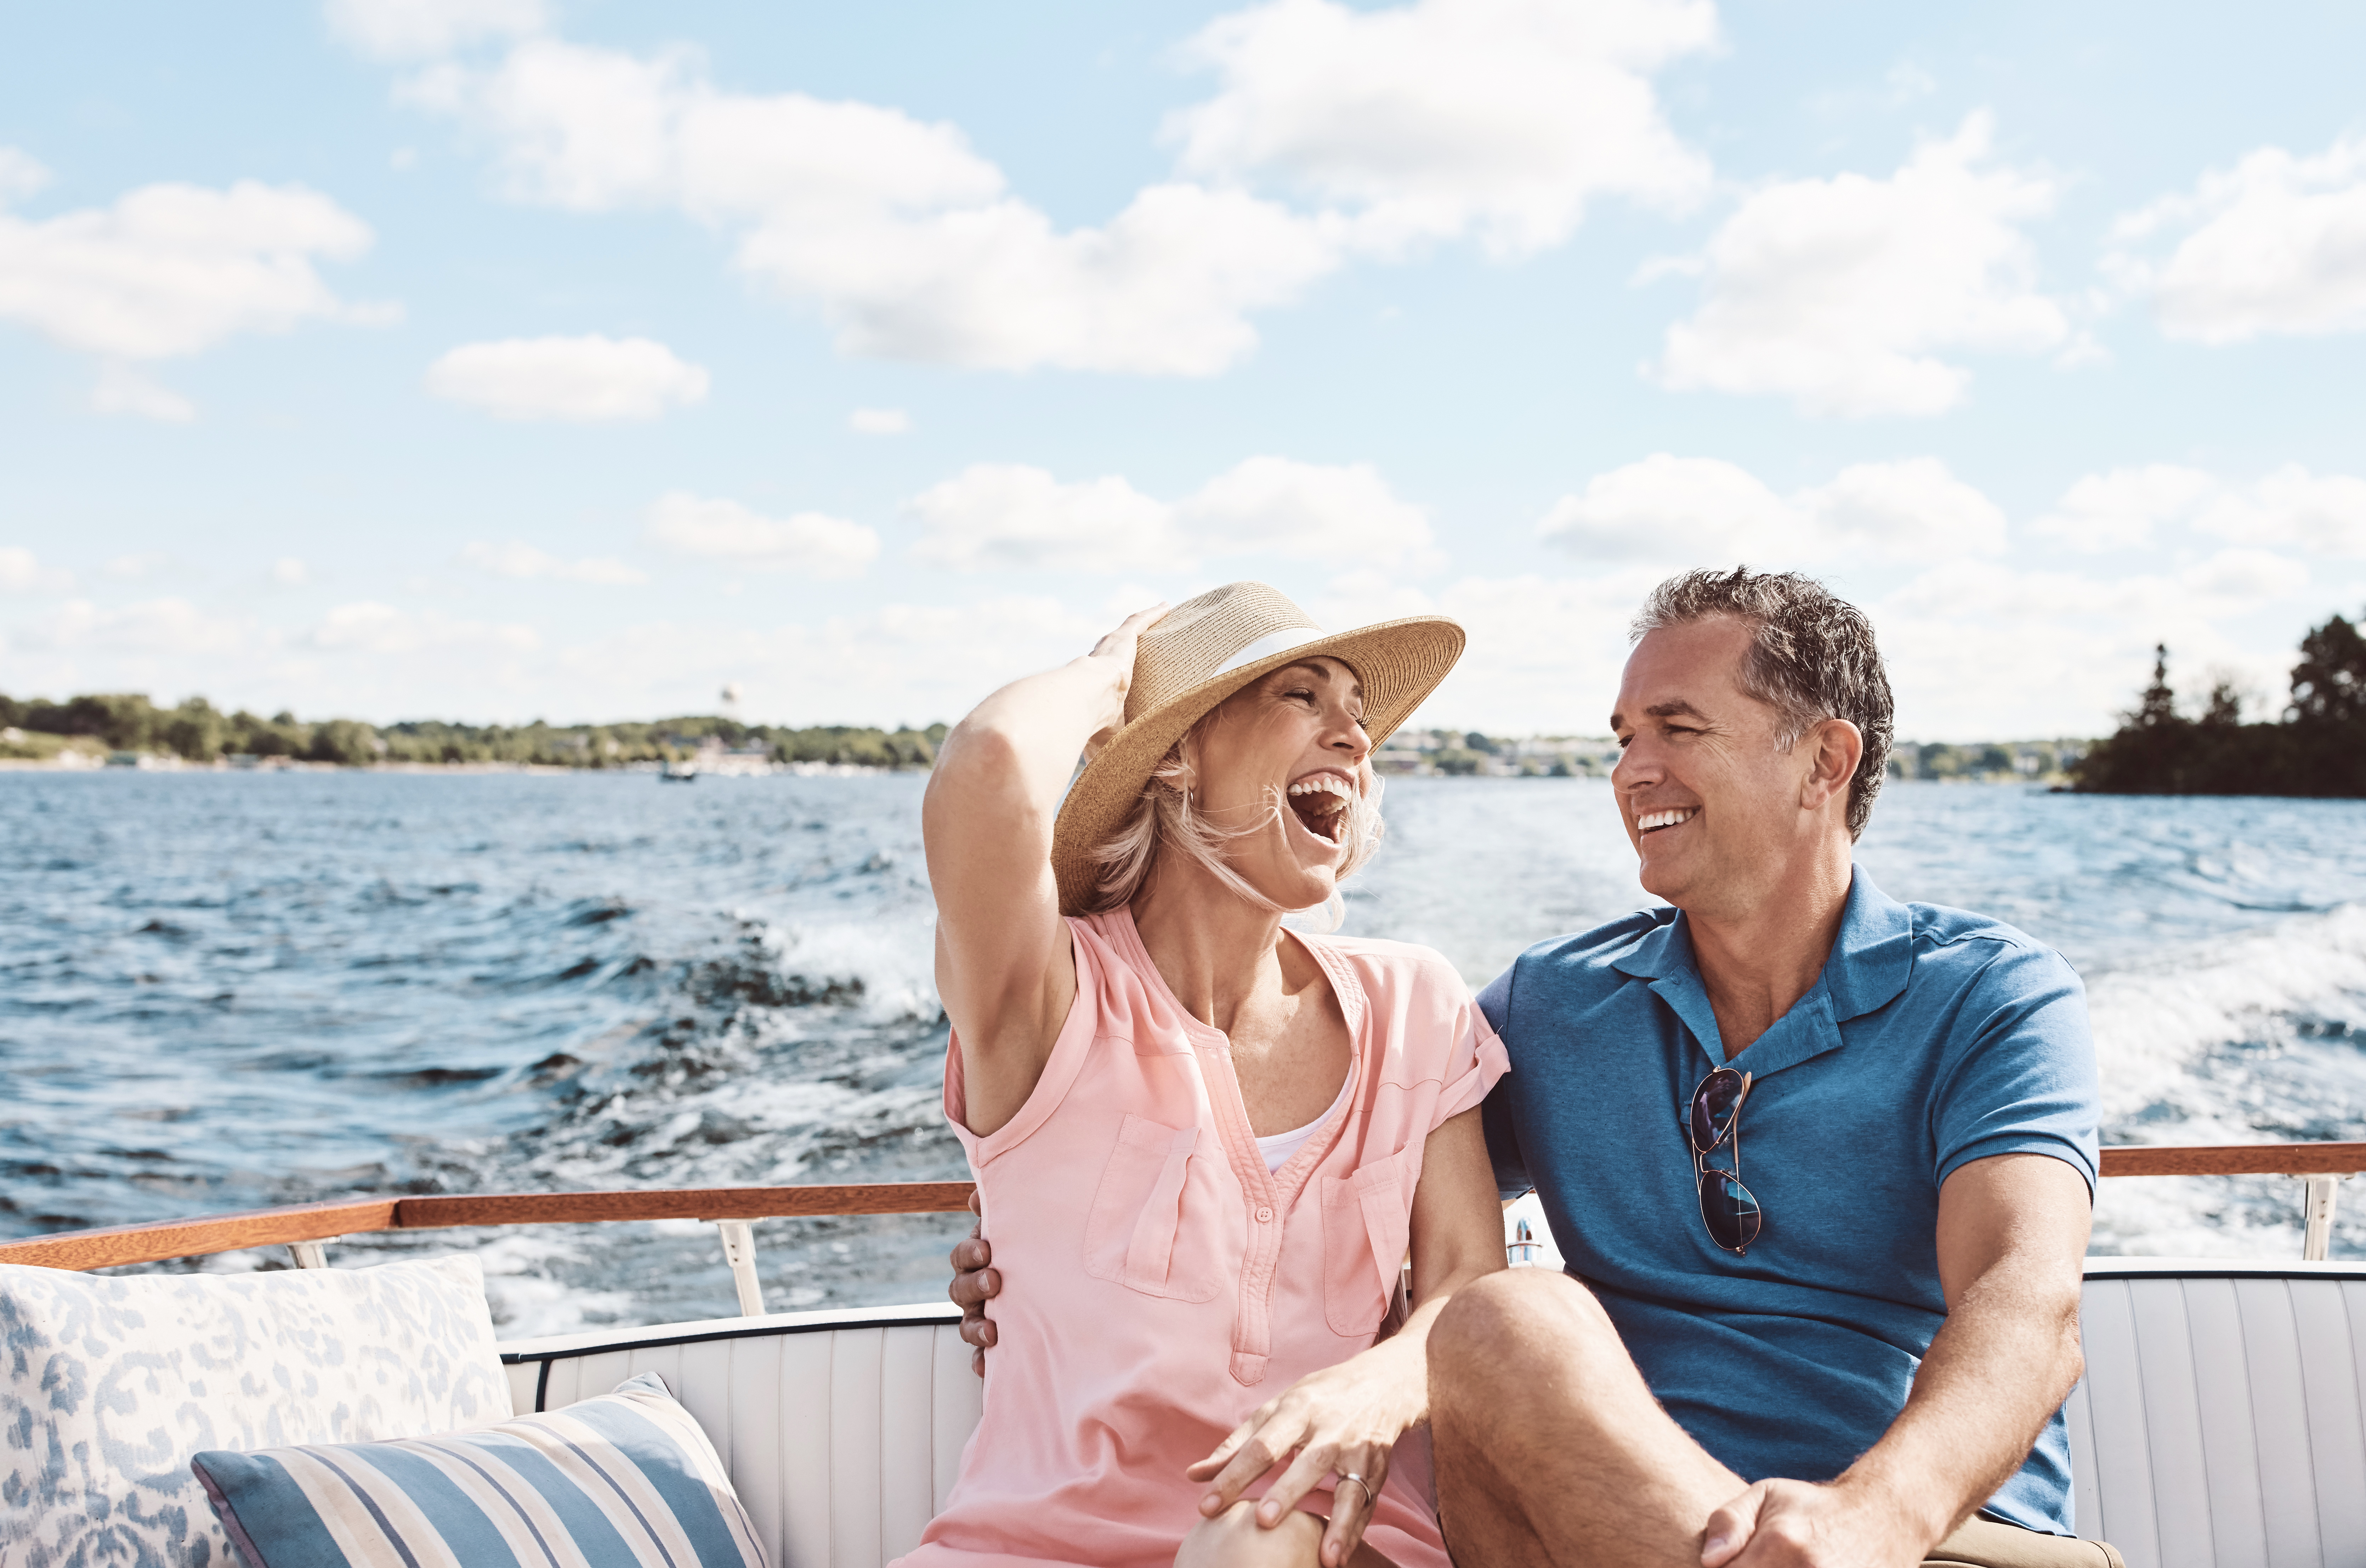 Couple laughing on boat on lake